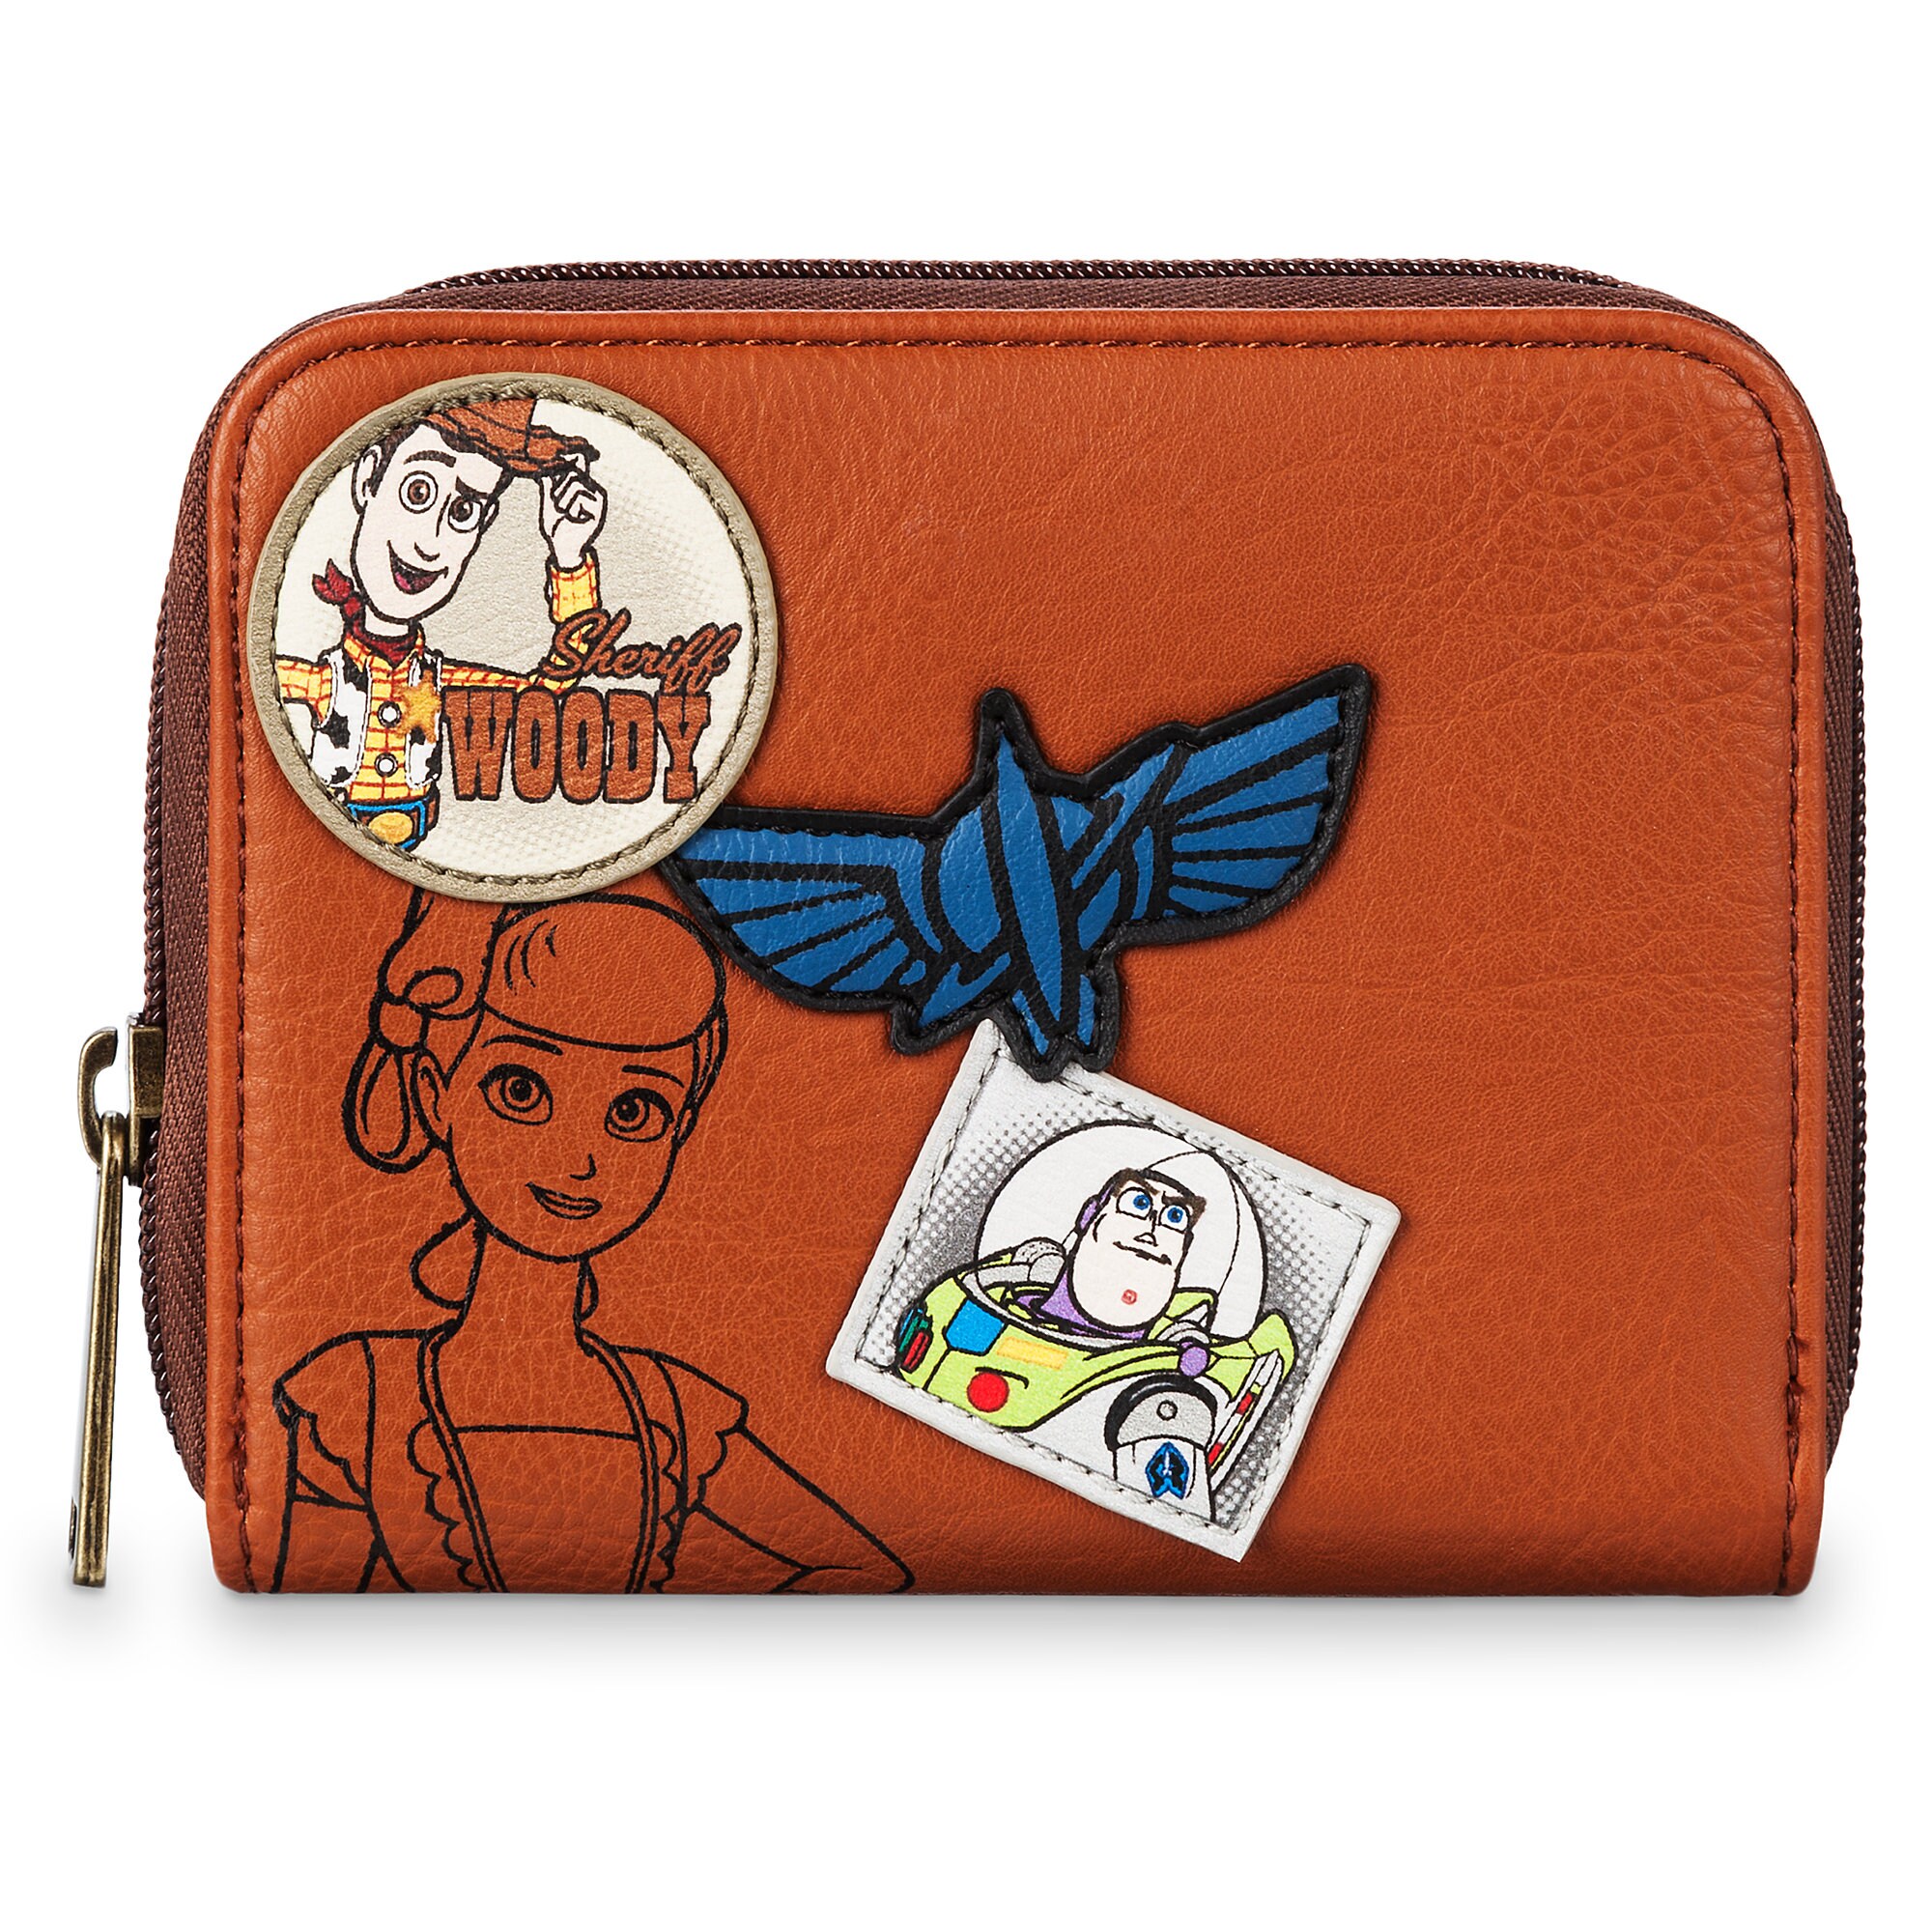 Toy Story 4 Wallet by Loungefly